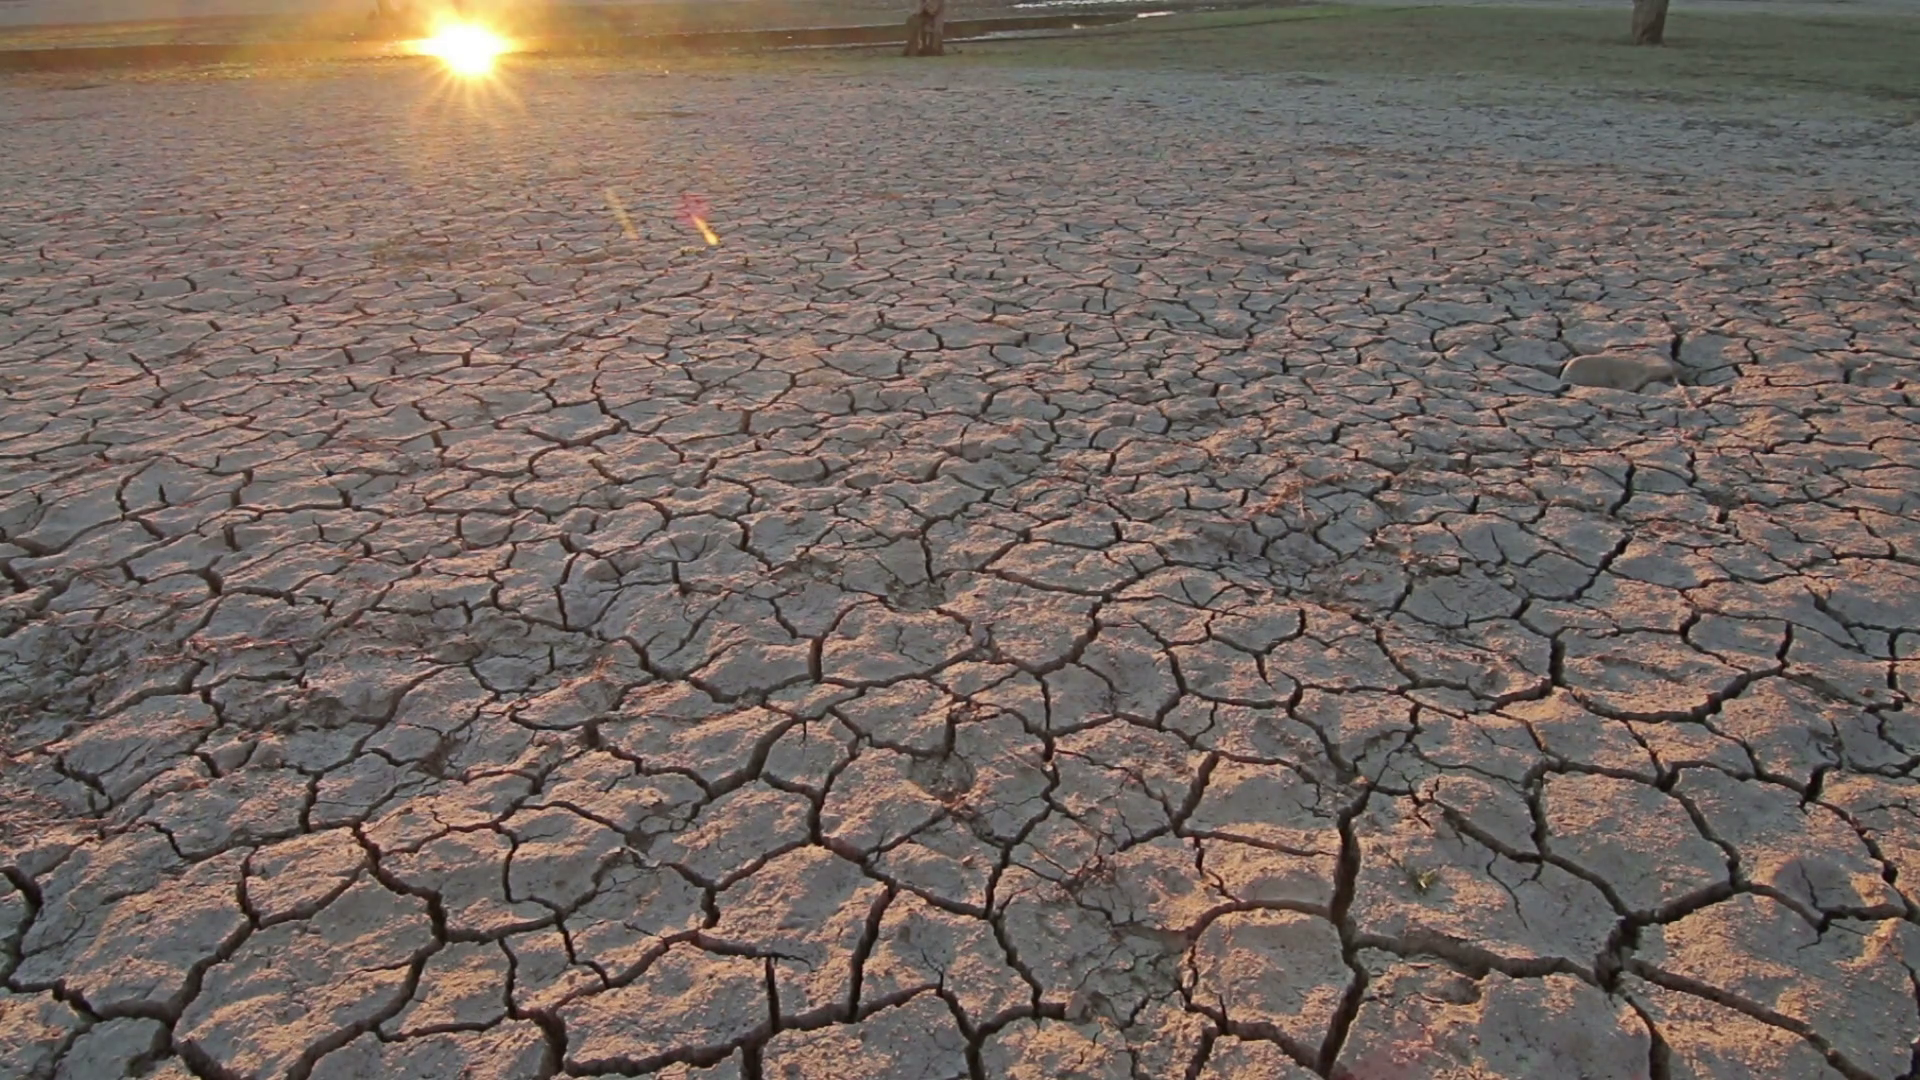 Sunset above drought disaster, dry soil. Climate change, global ...